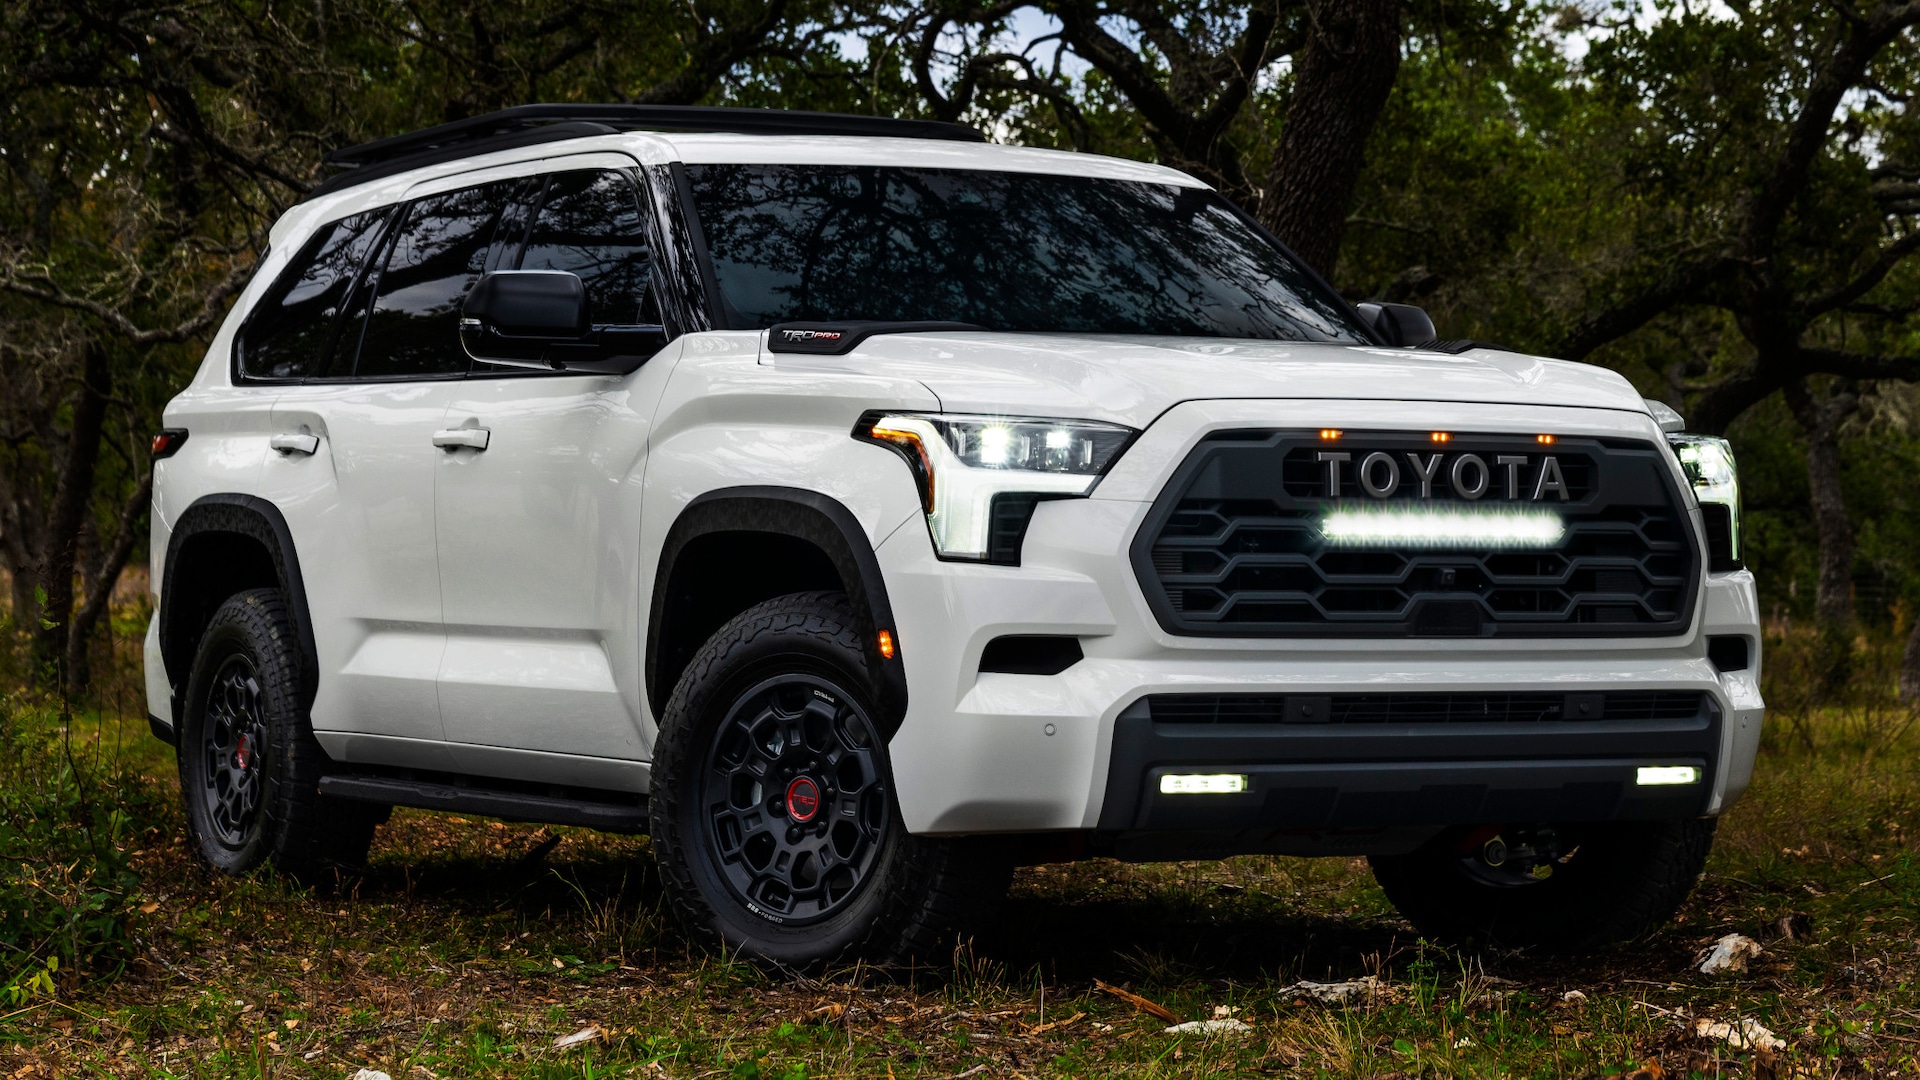 2023 Toyota Sequoia Prices, Reviews, and Photos - MotorTrend